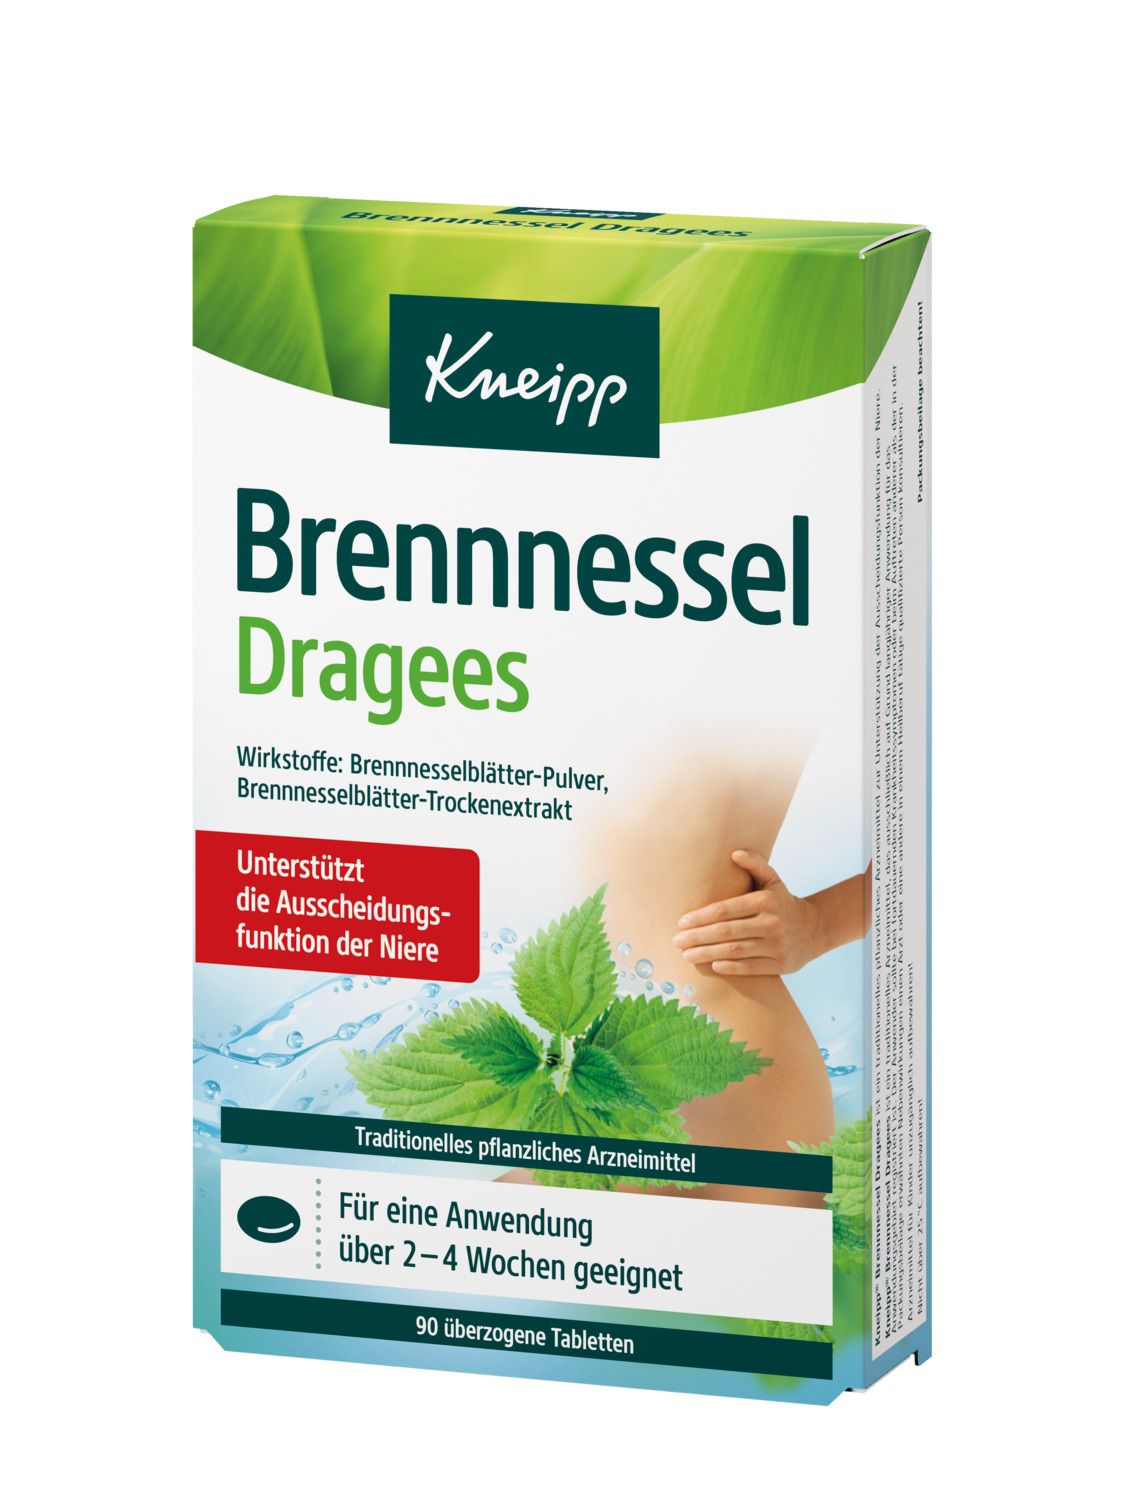 Kneipp® Brennessel Dragees